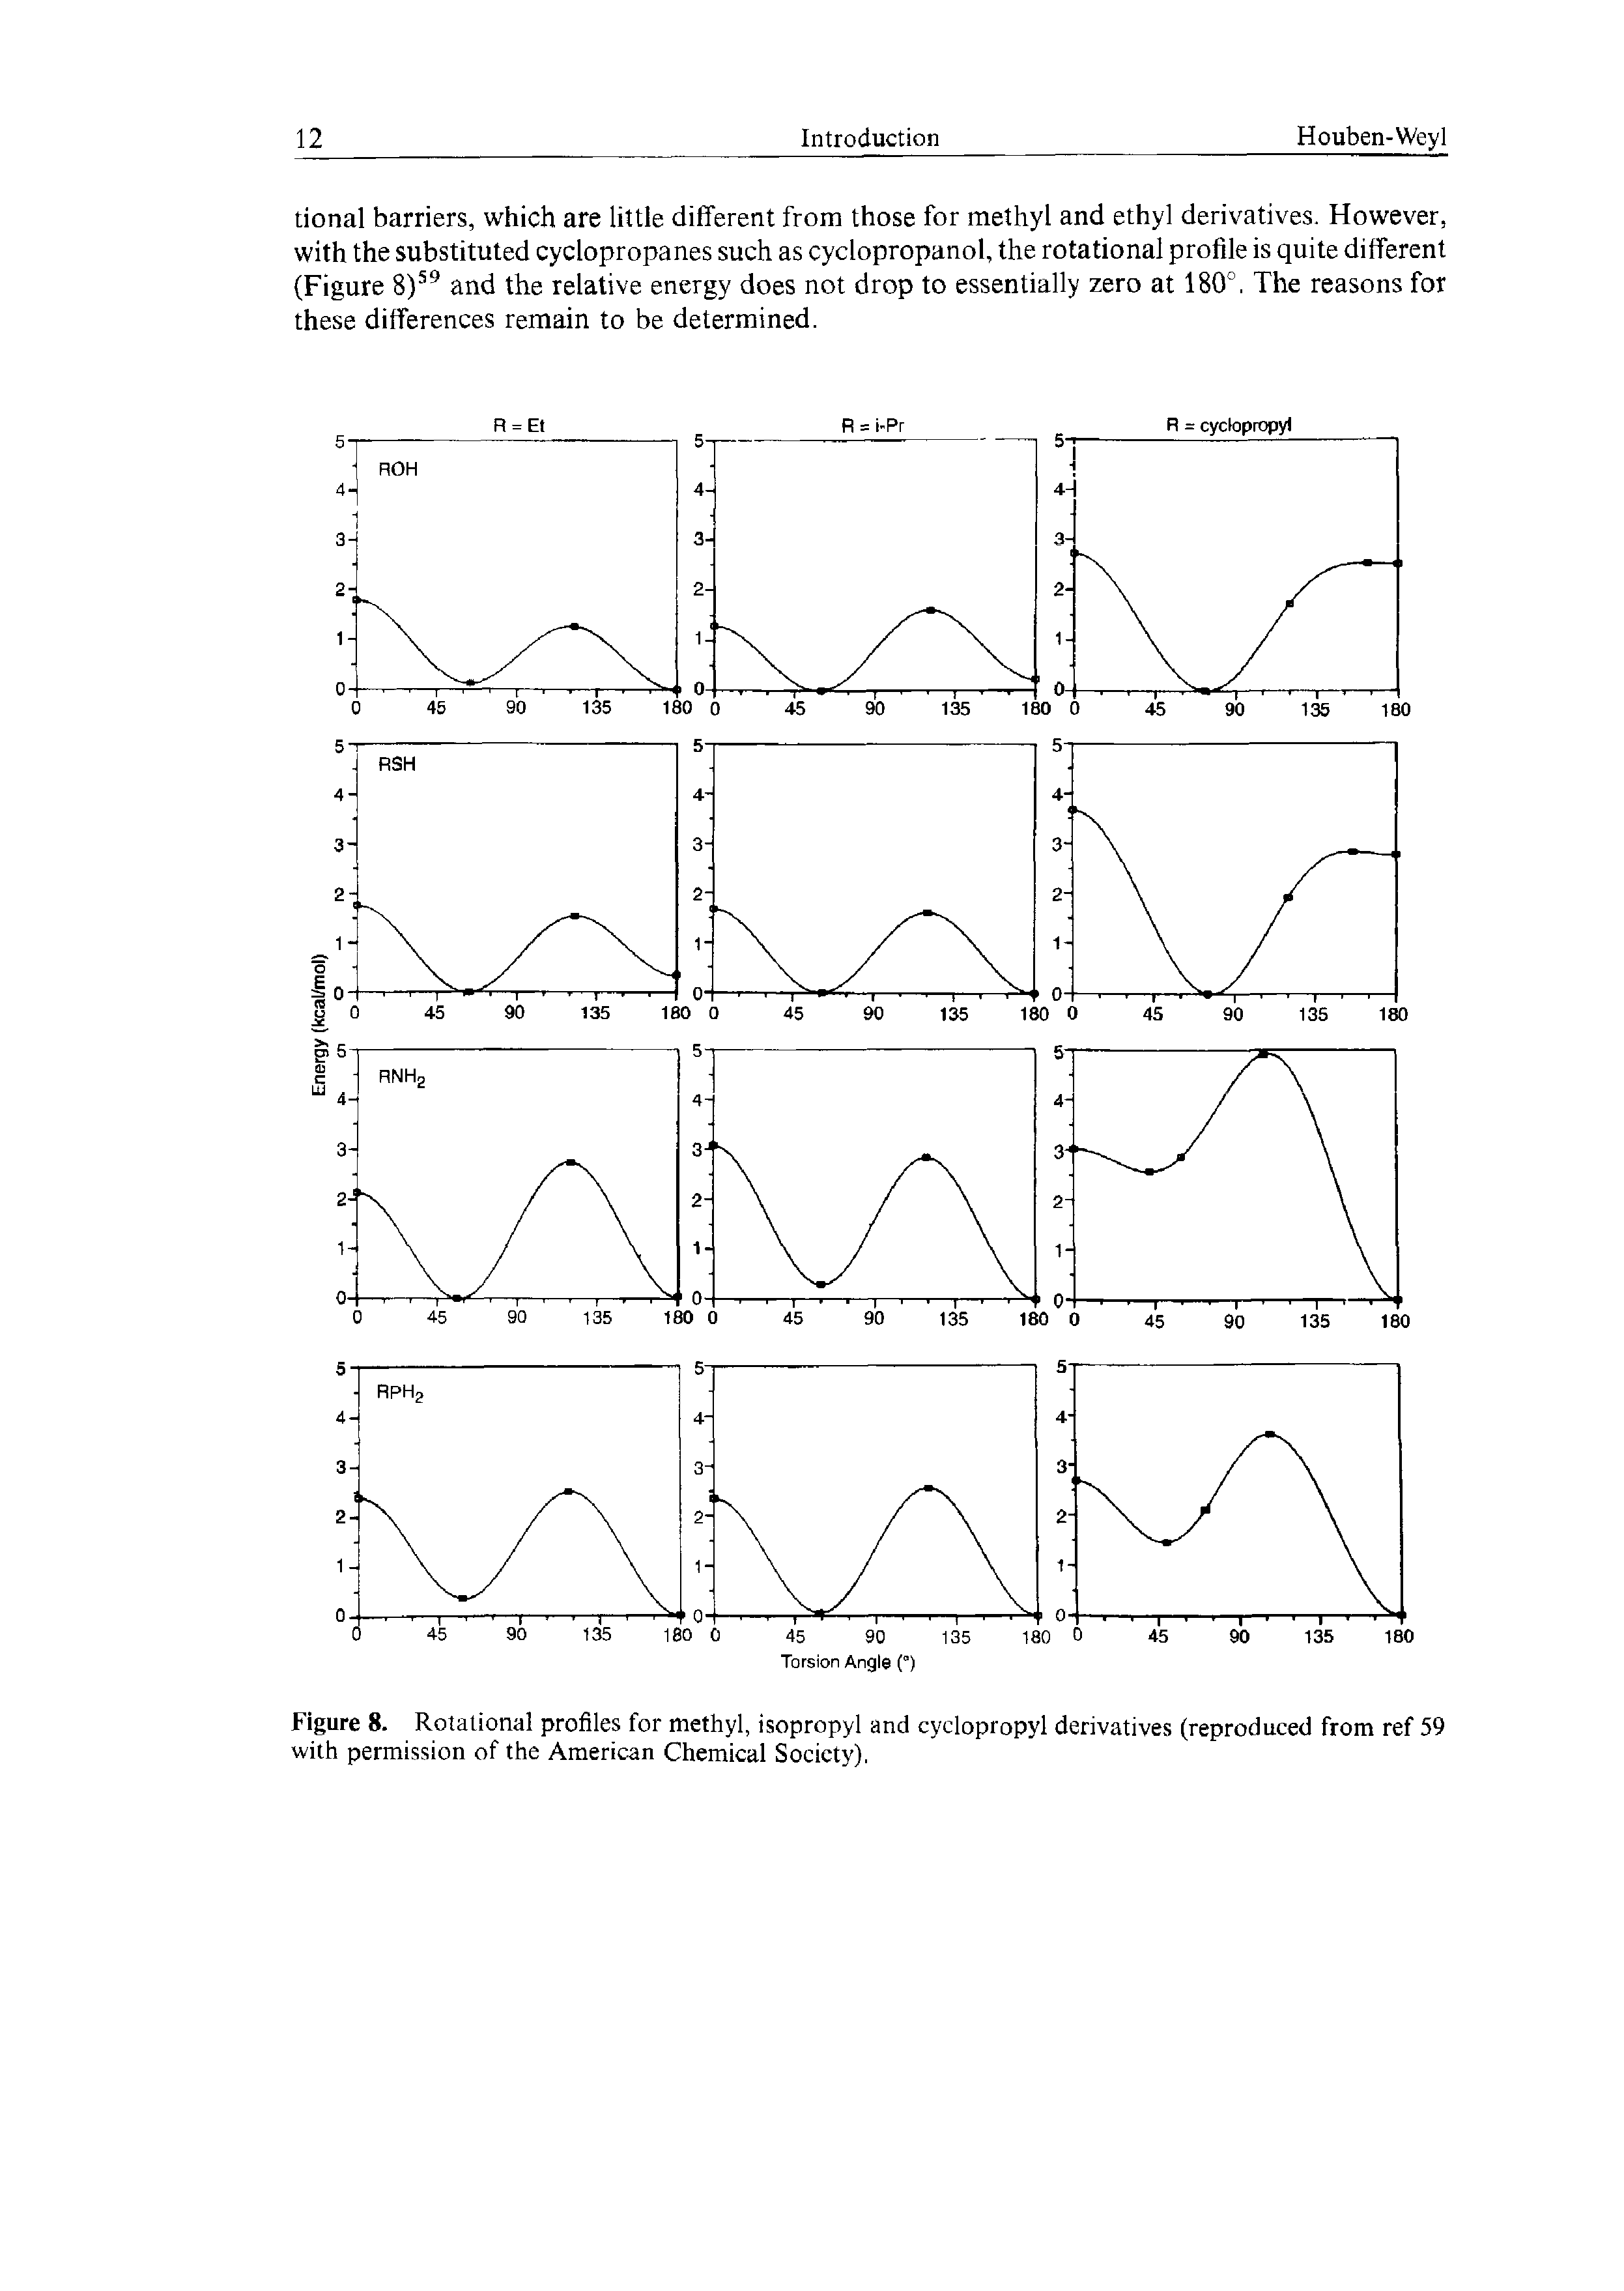 Figure 8. Rotational profiles for methyl, isopropyl and cyclopropyl derivatives (reproduced from ref 59 with permission of the American Chemical Society).